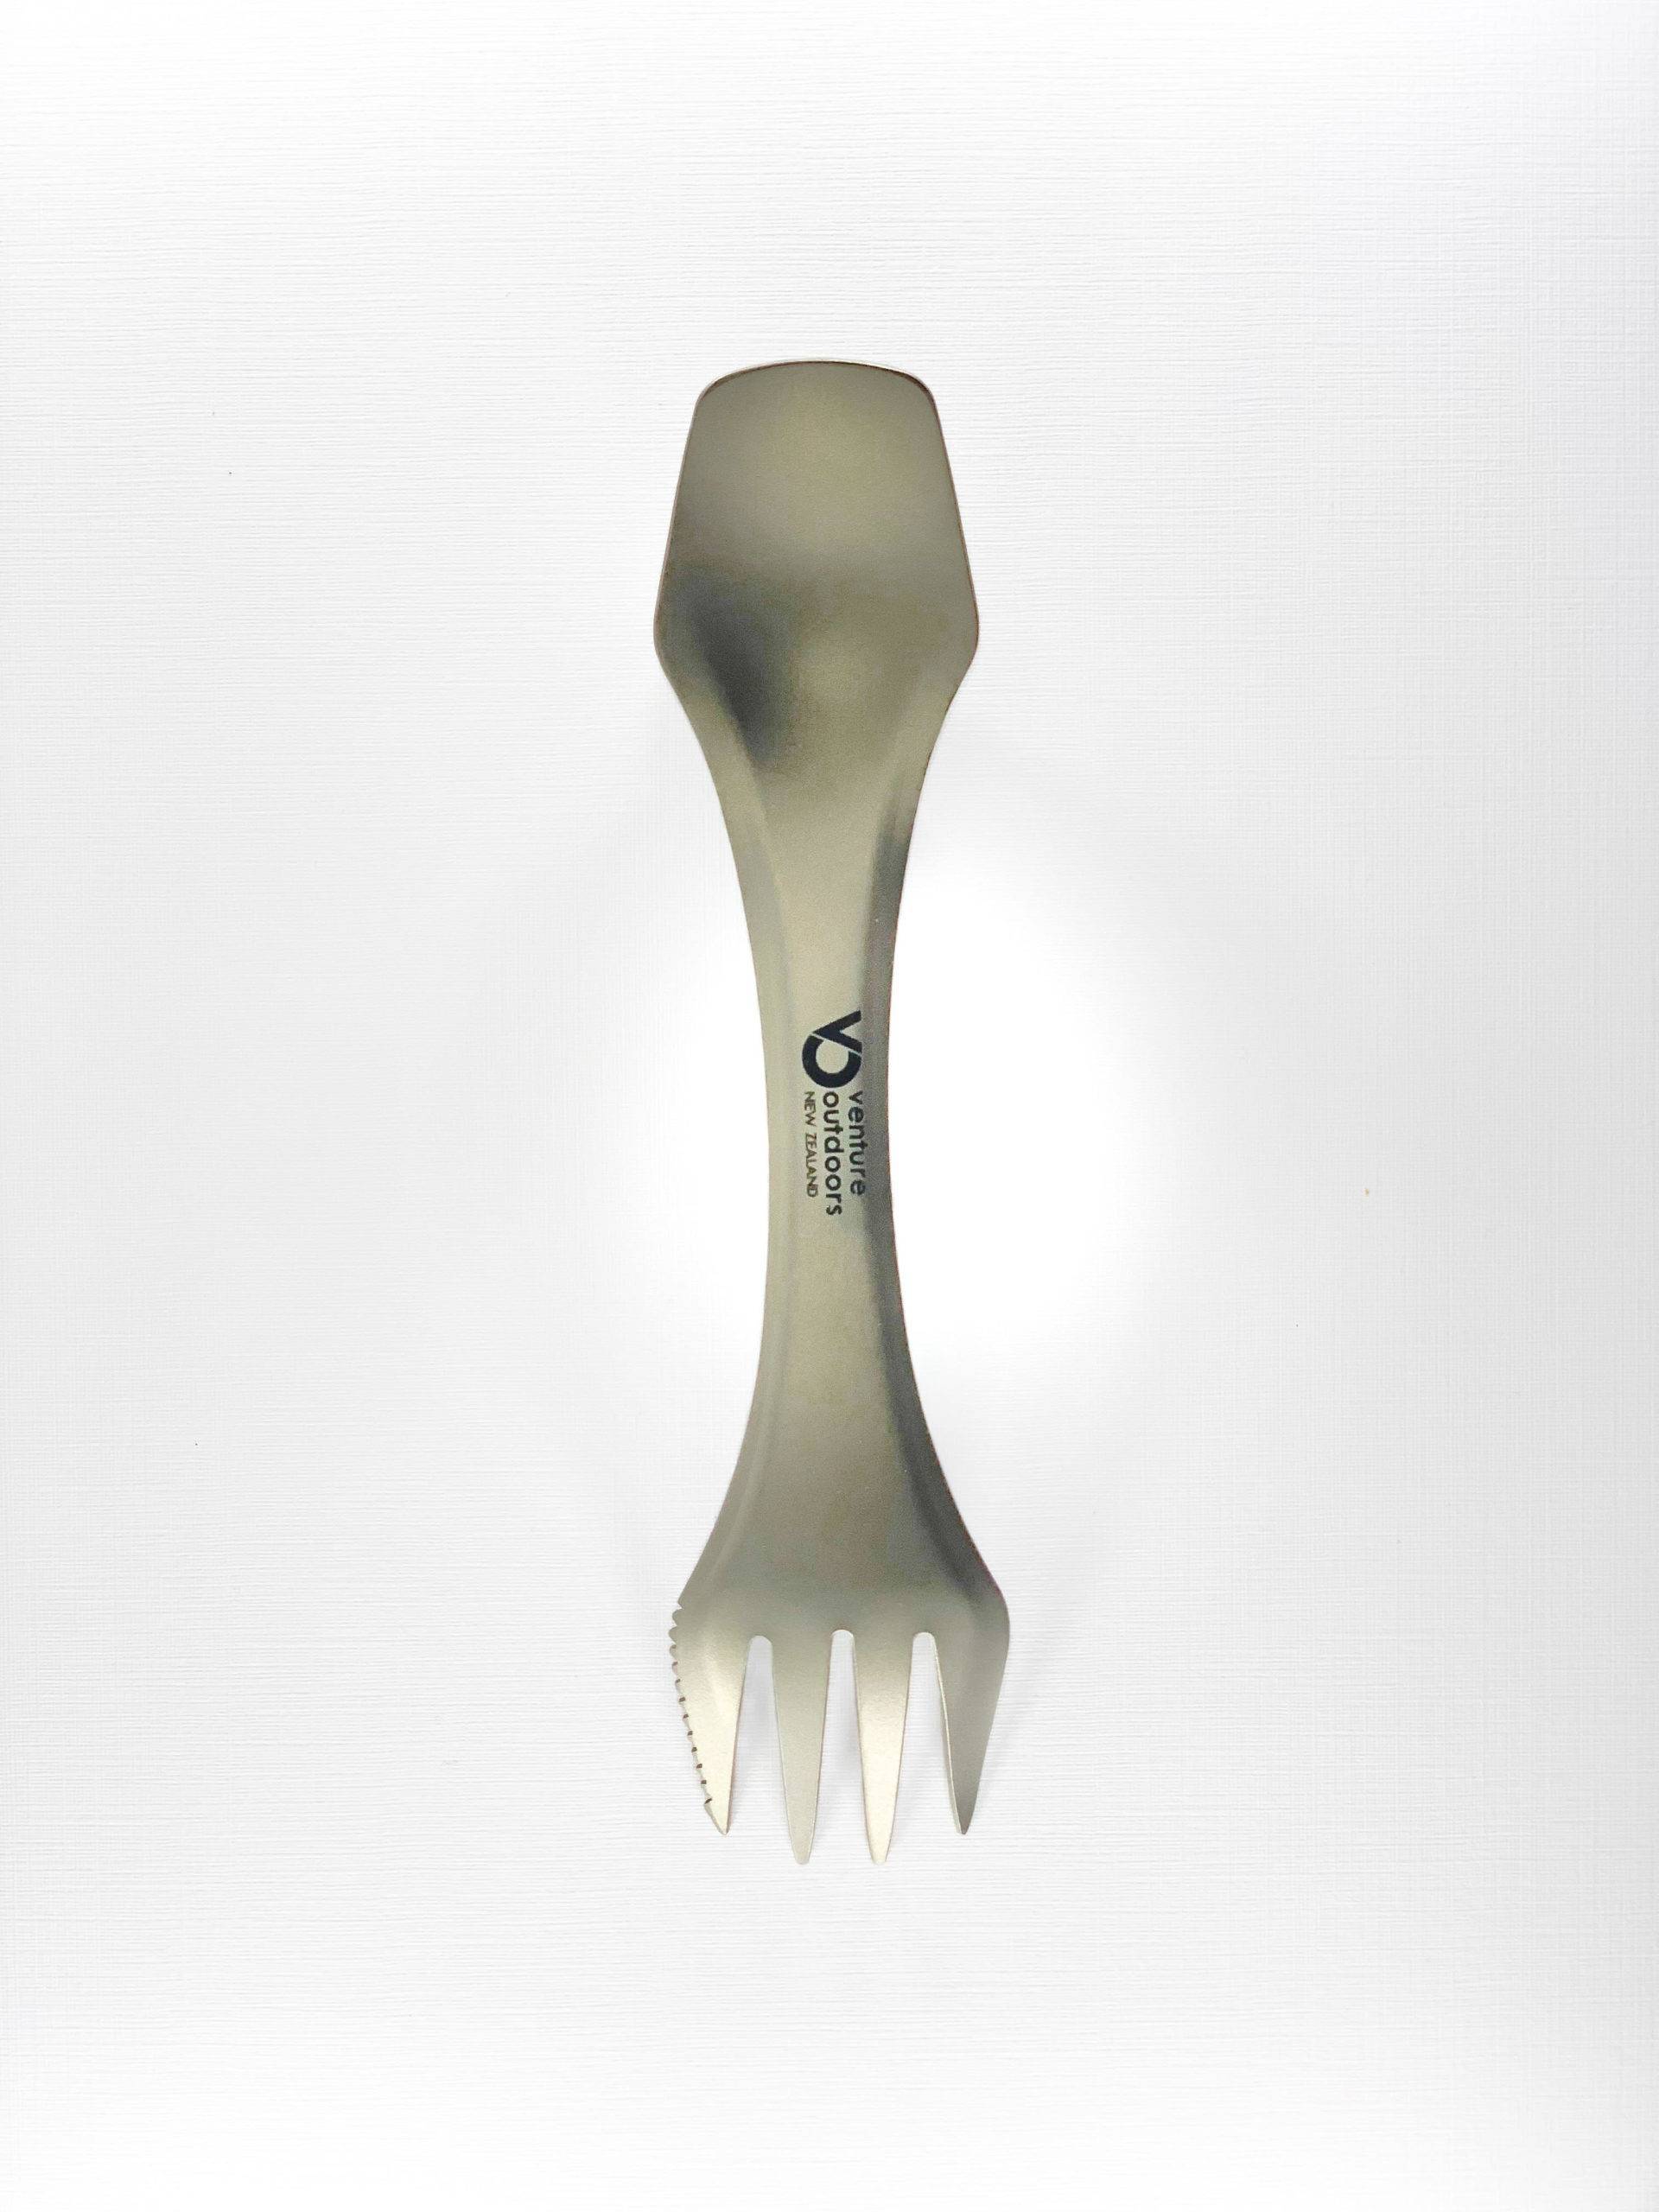 Venture Outdoors Titanium Spork - Tramping Food and Accessories sold by Venture Outdoors NZ